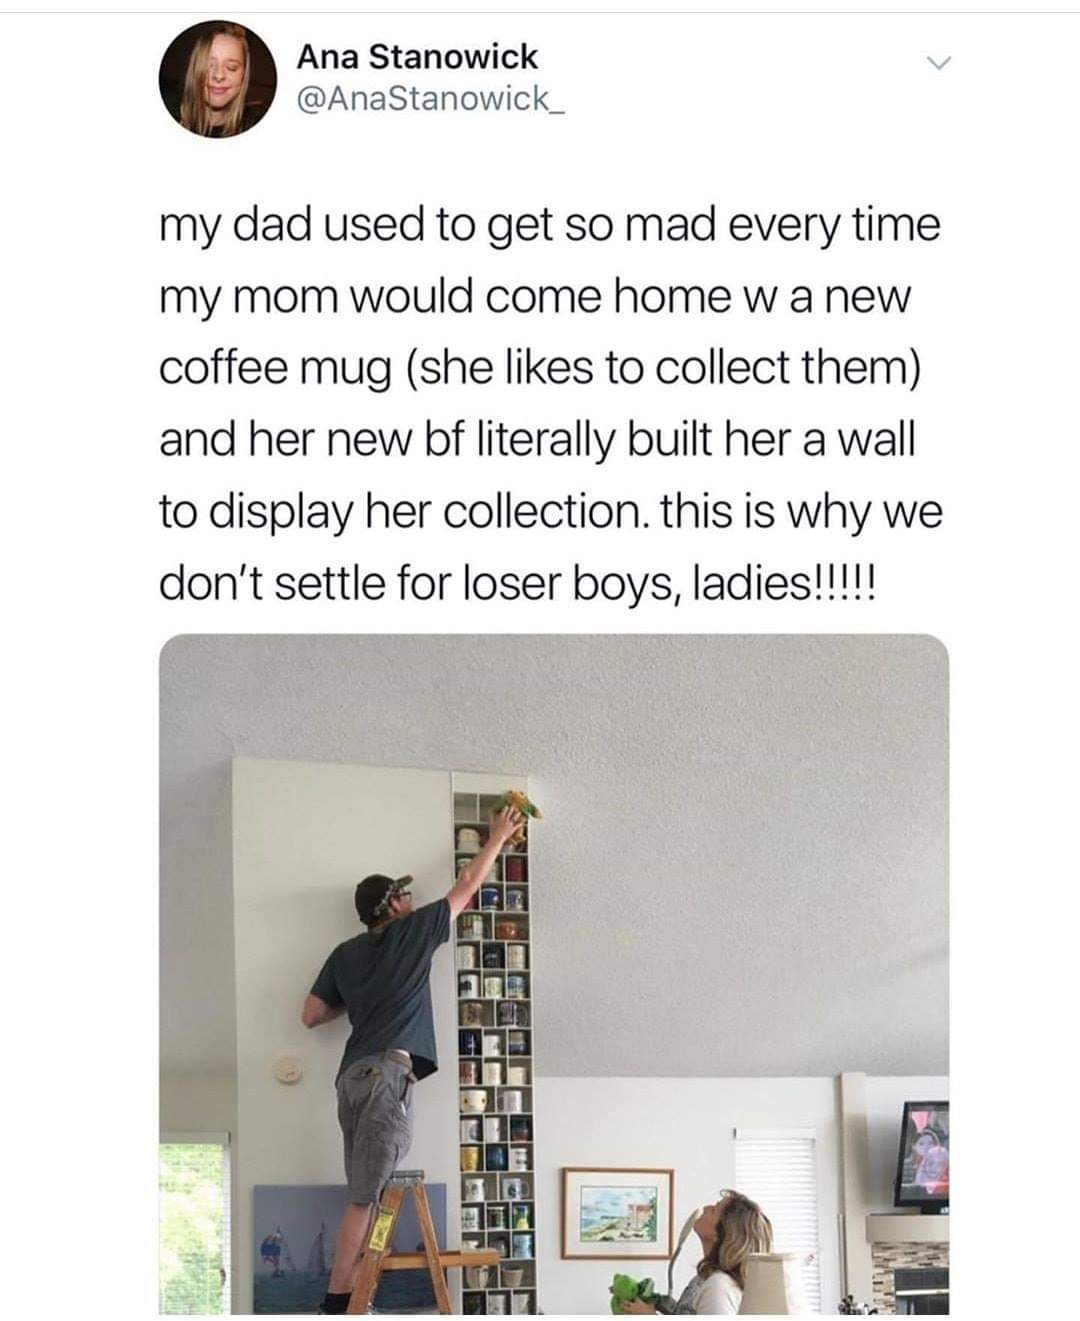 ana stanowick - Ana Stanowick my dad used to get so mad every time my mom would come home wa new coffee mug she to collect them and her new bf literally built her a wall to display her collection. this is why we don't settle for loser boys, ladies!!!!!